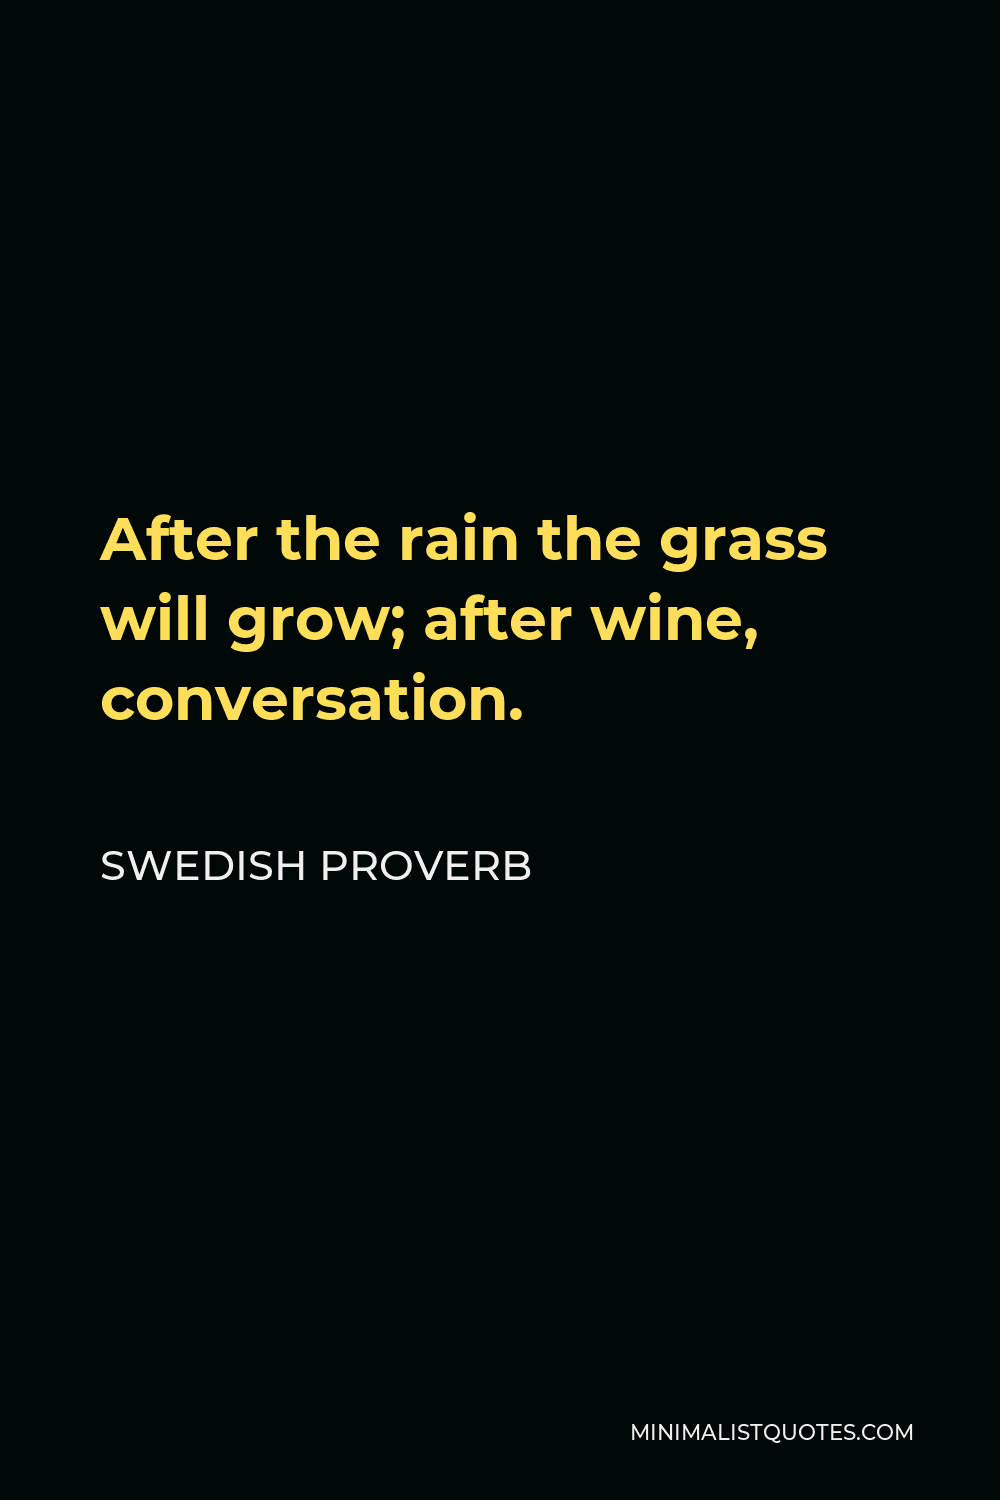 Swedish Proverb Quote - After the rain the grass will grow; after wine, conversation.